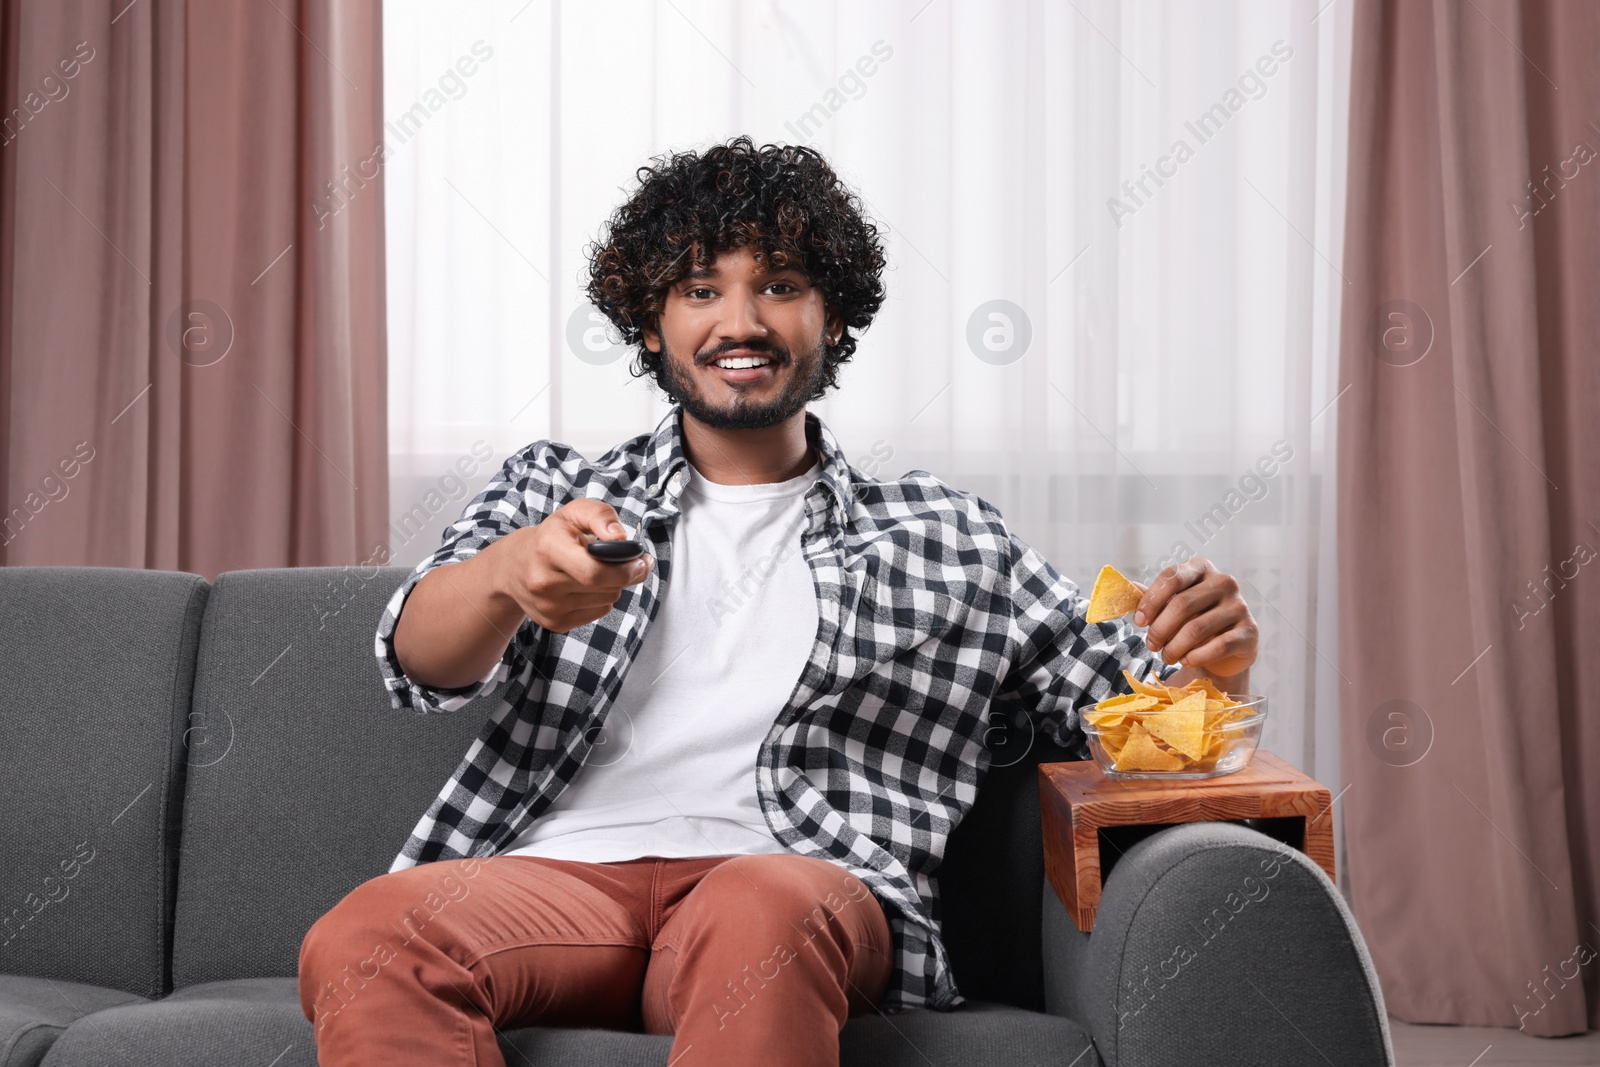 Photo of Happy man switching TV channels and eating nacho chips on sofa with wooden armrest table at home